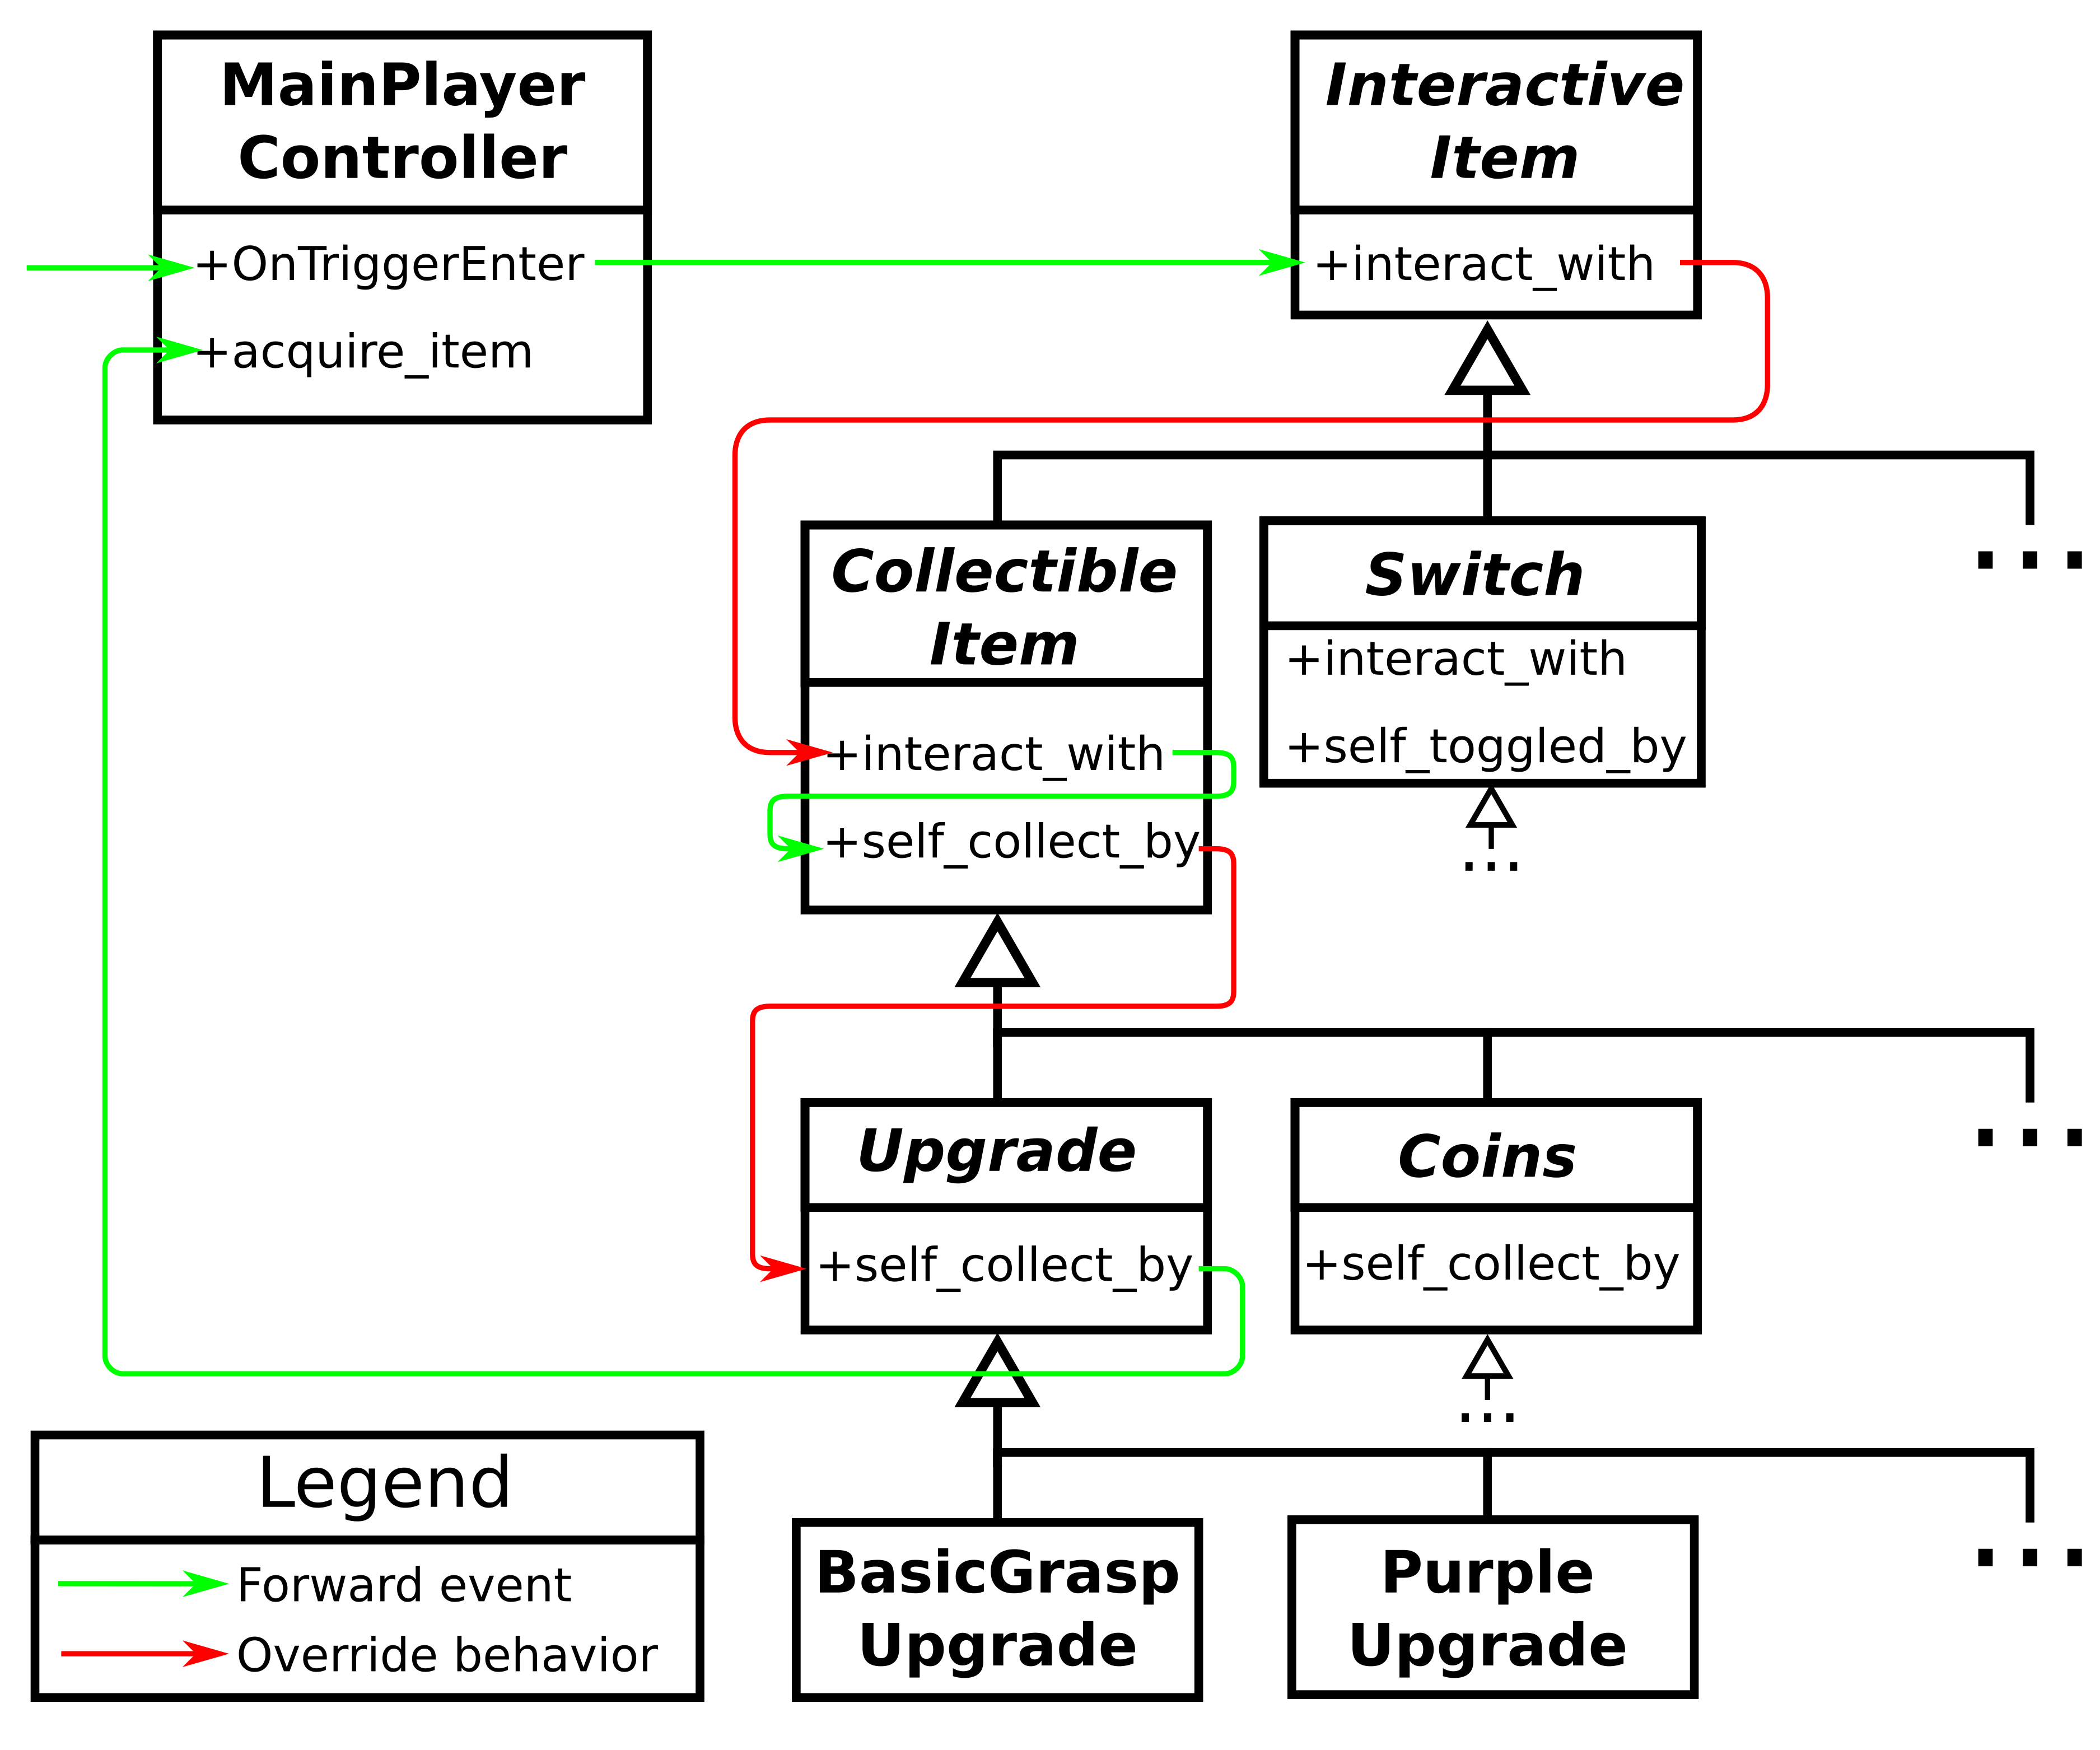 Schema of the implemented structure